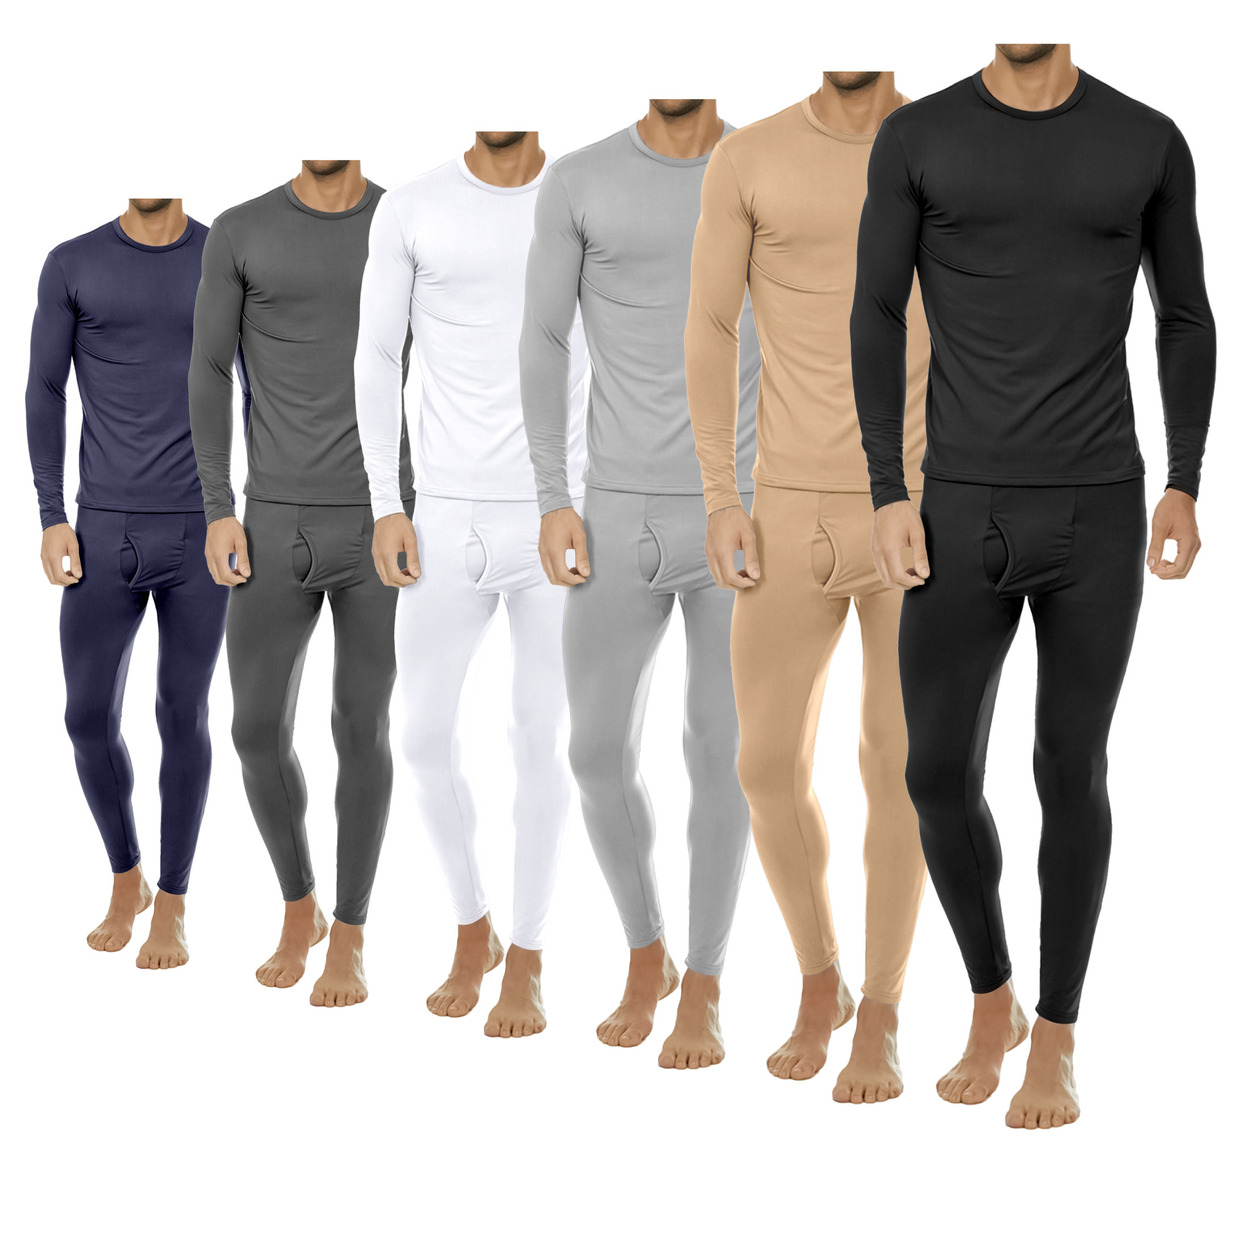 2-Pieces: Men's Winter Warm Fleece Lined Thermal Underwear Set For Cold Weather - White, Medium